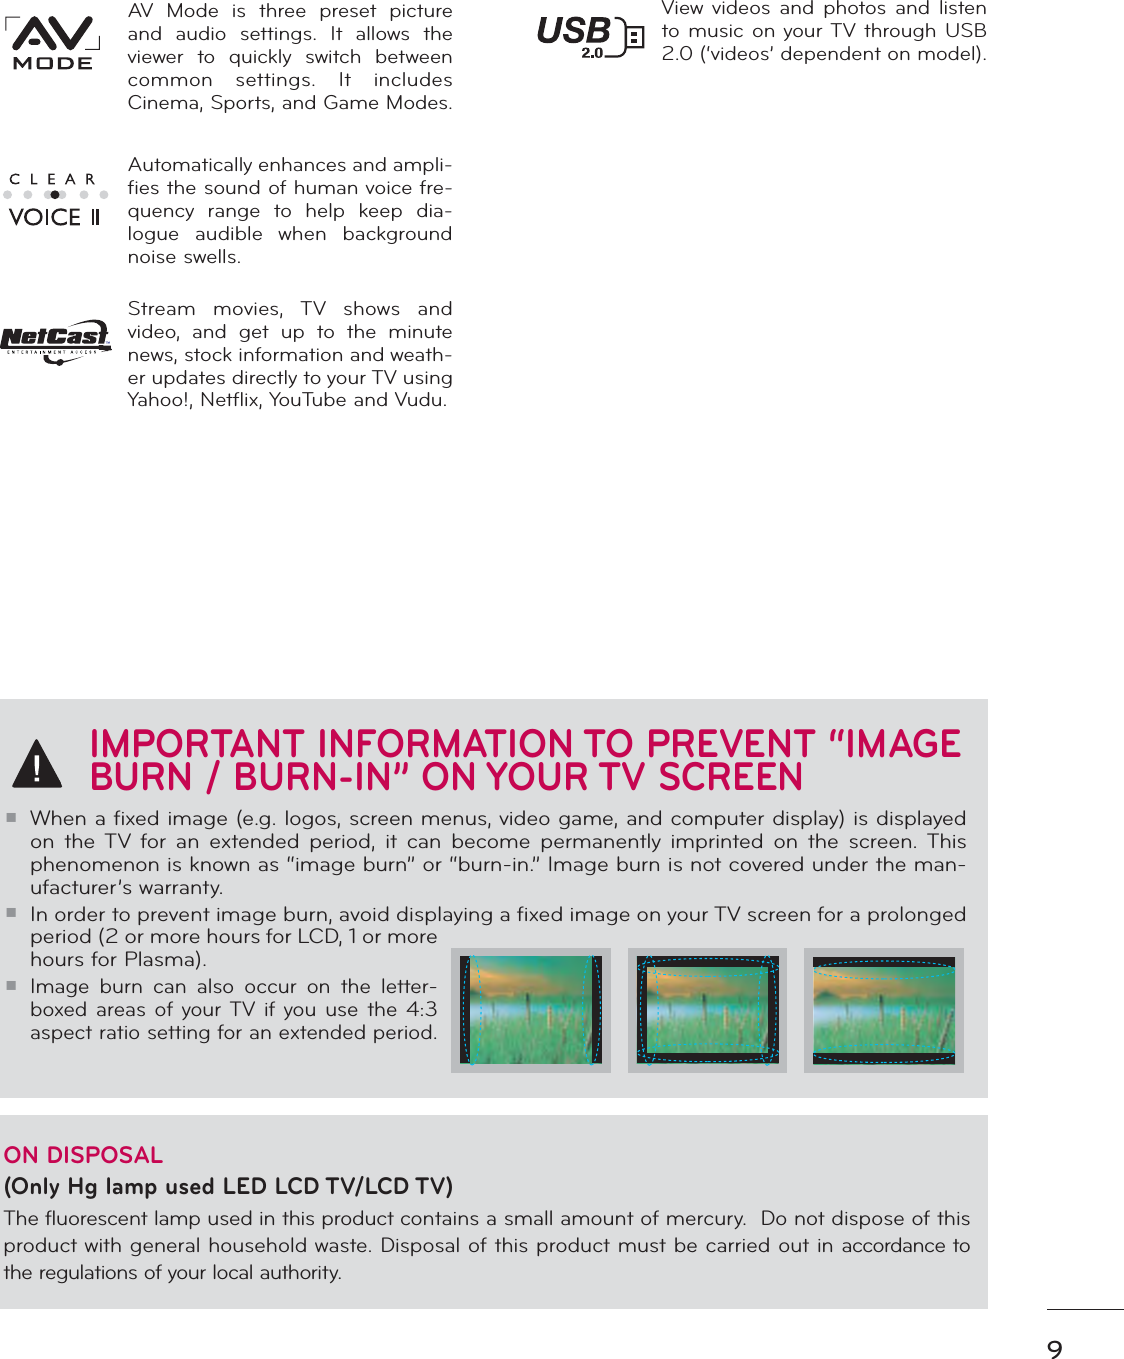 9IMPORTANT INFORMATION TO PREVENT “IMAGE BURN / BURN-IN” ON YOUR TV SCREENᯫWhen a fixed image (e.g. logos, screen menus, video game, and computer display) is displayed on the TV for an extended period, it can become permanently imprinted on the screen. This phenomenon is known as “image burn” or “burn-in.” Image burn is not covered under the man-ufacturer’s warranty. ᯫIn order to prevent image burn, avoid displaying a fixed image on your TV screen for a prolonged period (2 or more hours for LCD, 1 or more hours for Plasma). ᯫImage burn can also occur on the letter-boxed areas of your TV if you use the 4:3 aspect ratio setting for an extended period.ON DISPOSAL (Only Hg lamp used LED LCD TV/LCD TV)The fluorescent lamp used in this product contains a small amount of mercury.  Do not dispose of this product with general household waste. Disposal of this product must be carried out in accordance to the regulations of your local authority.View videos and photos and listen to music on your TV through USB 2.0 (‘videos’ dependent on model).AV Mode is three preset picture and audio settings. It allows the viewer to quickly switch between common settings. It includes Cinema, Sports, and Game Modes.Automatically enhances and ampli-fies the sound of human voice fre-quency range to help keep dia-logue audible when background noise swells.Stream movies, TV shows and video, and get up to the minute news, stock information and weath-er updates directly to your TV using Yahoo!, Netflix, YouTube and Vudu.